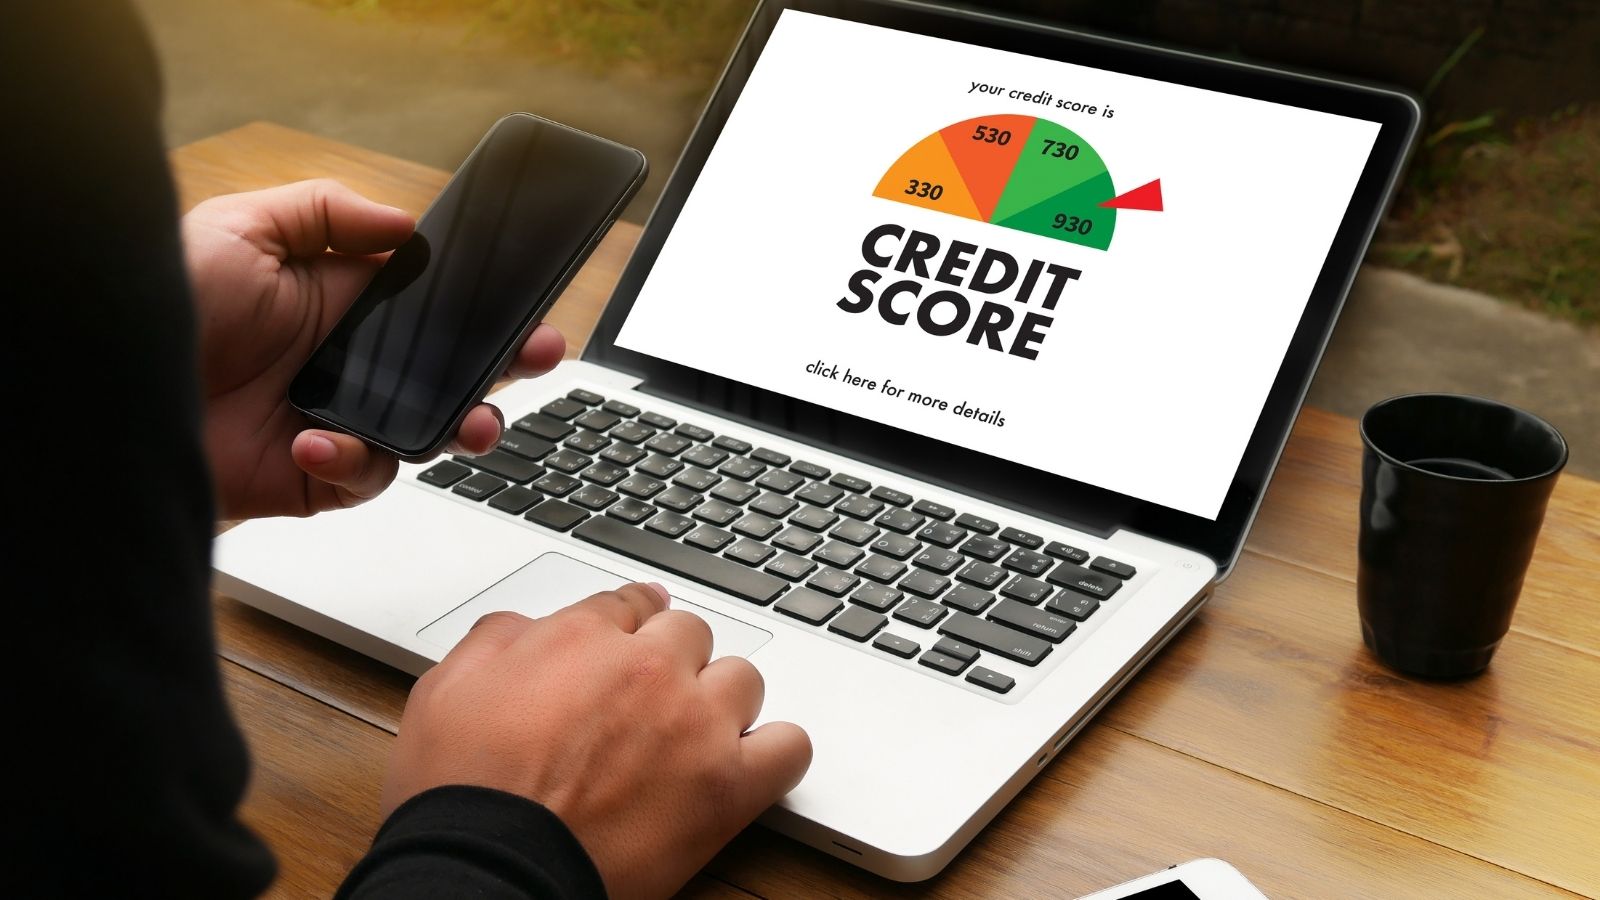 What Credit Score is Needed to Purchase A House?